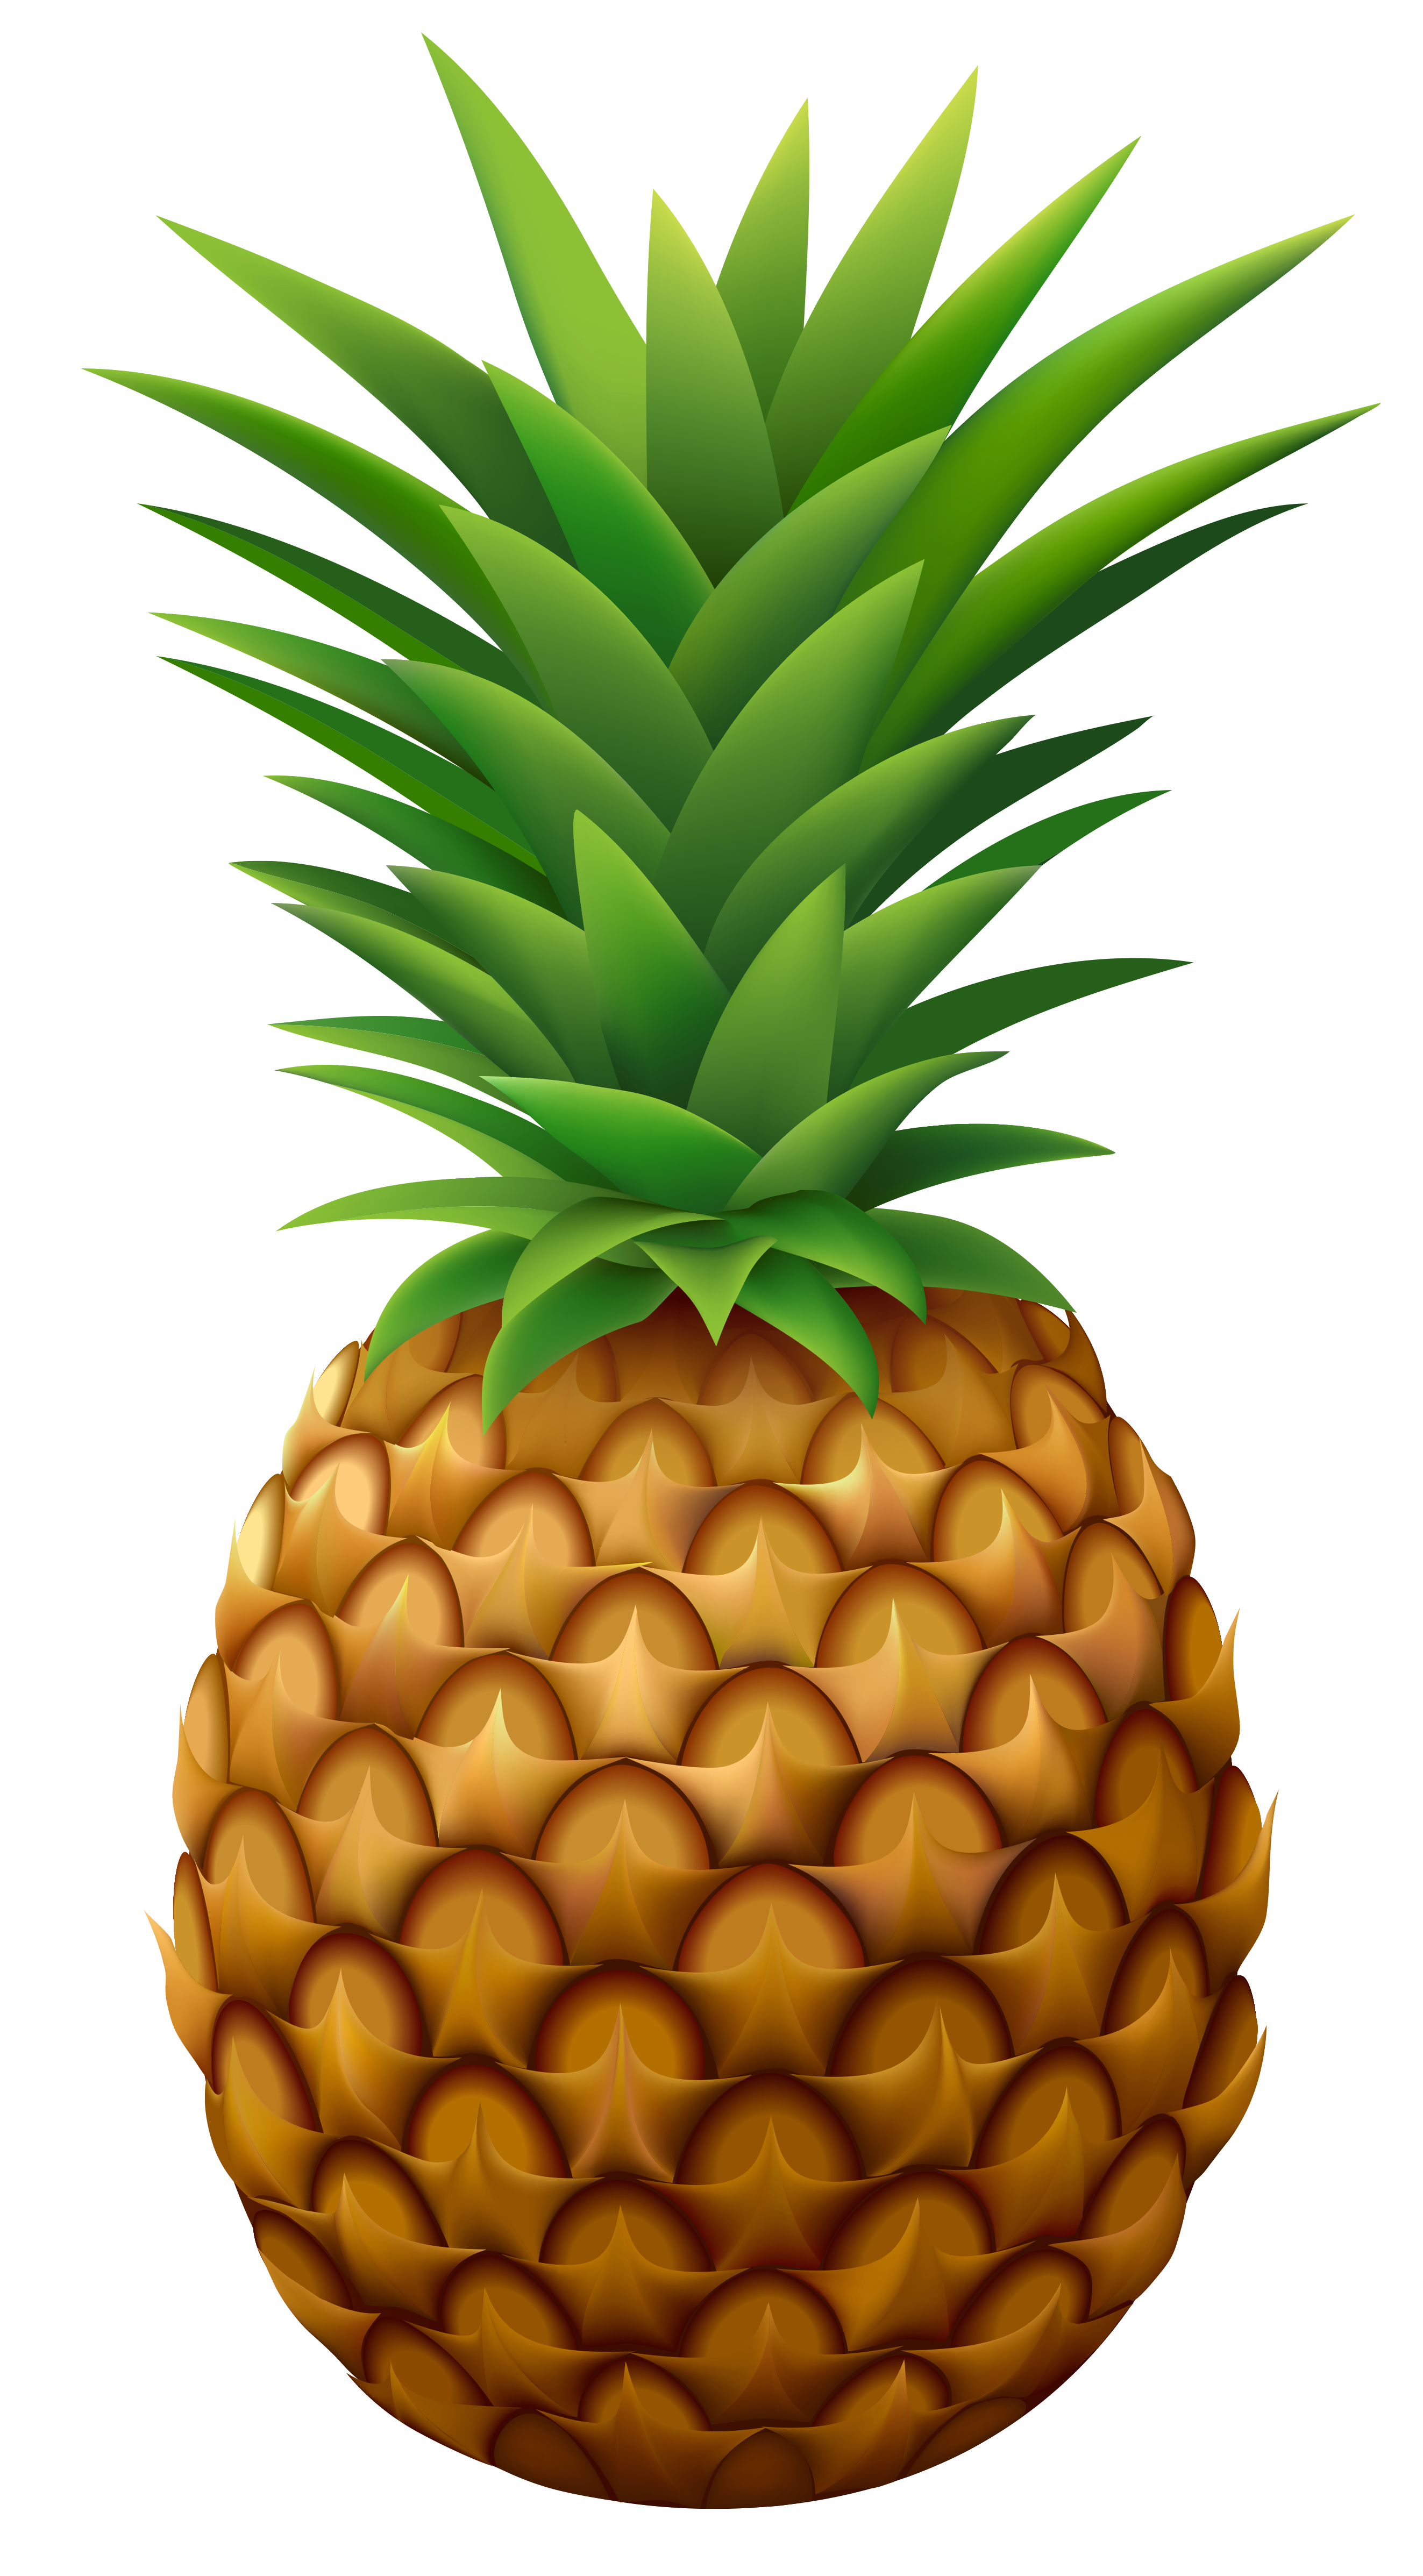 Pineapple png vector image. Clipart crown fruit